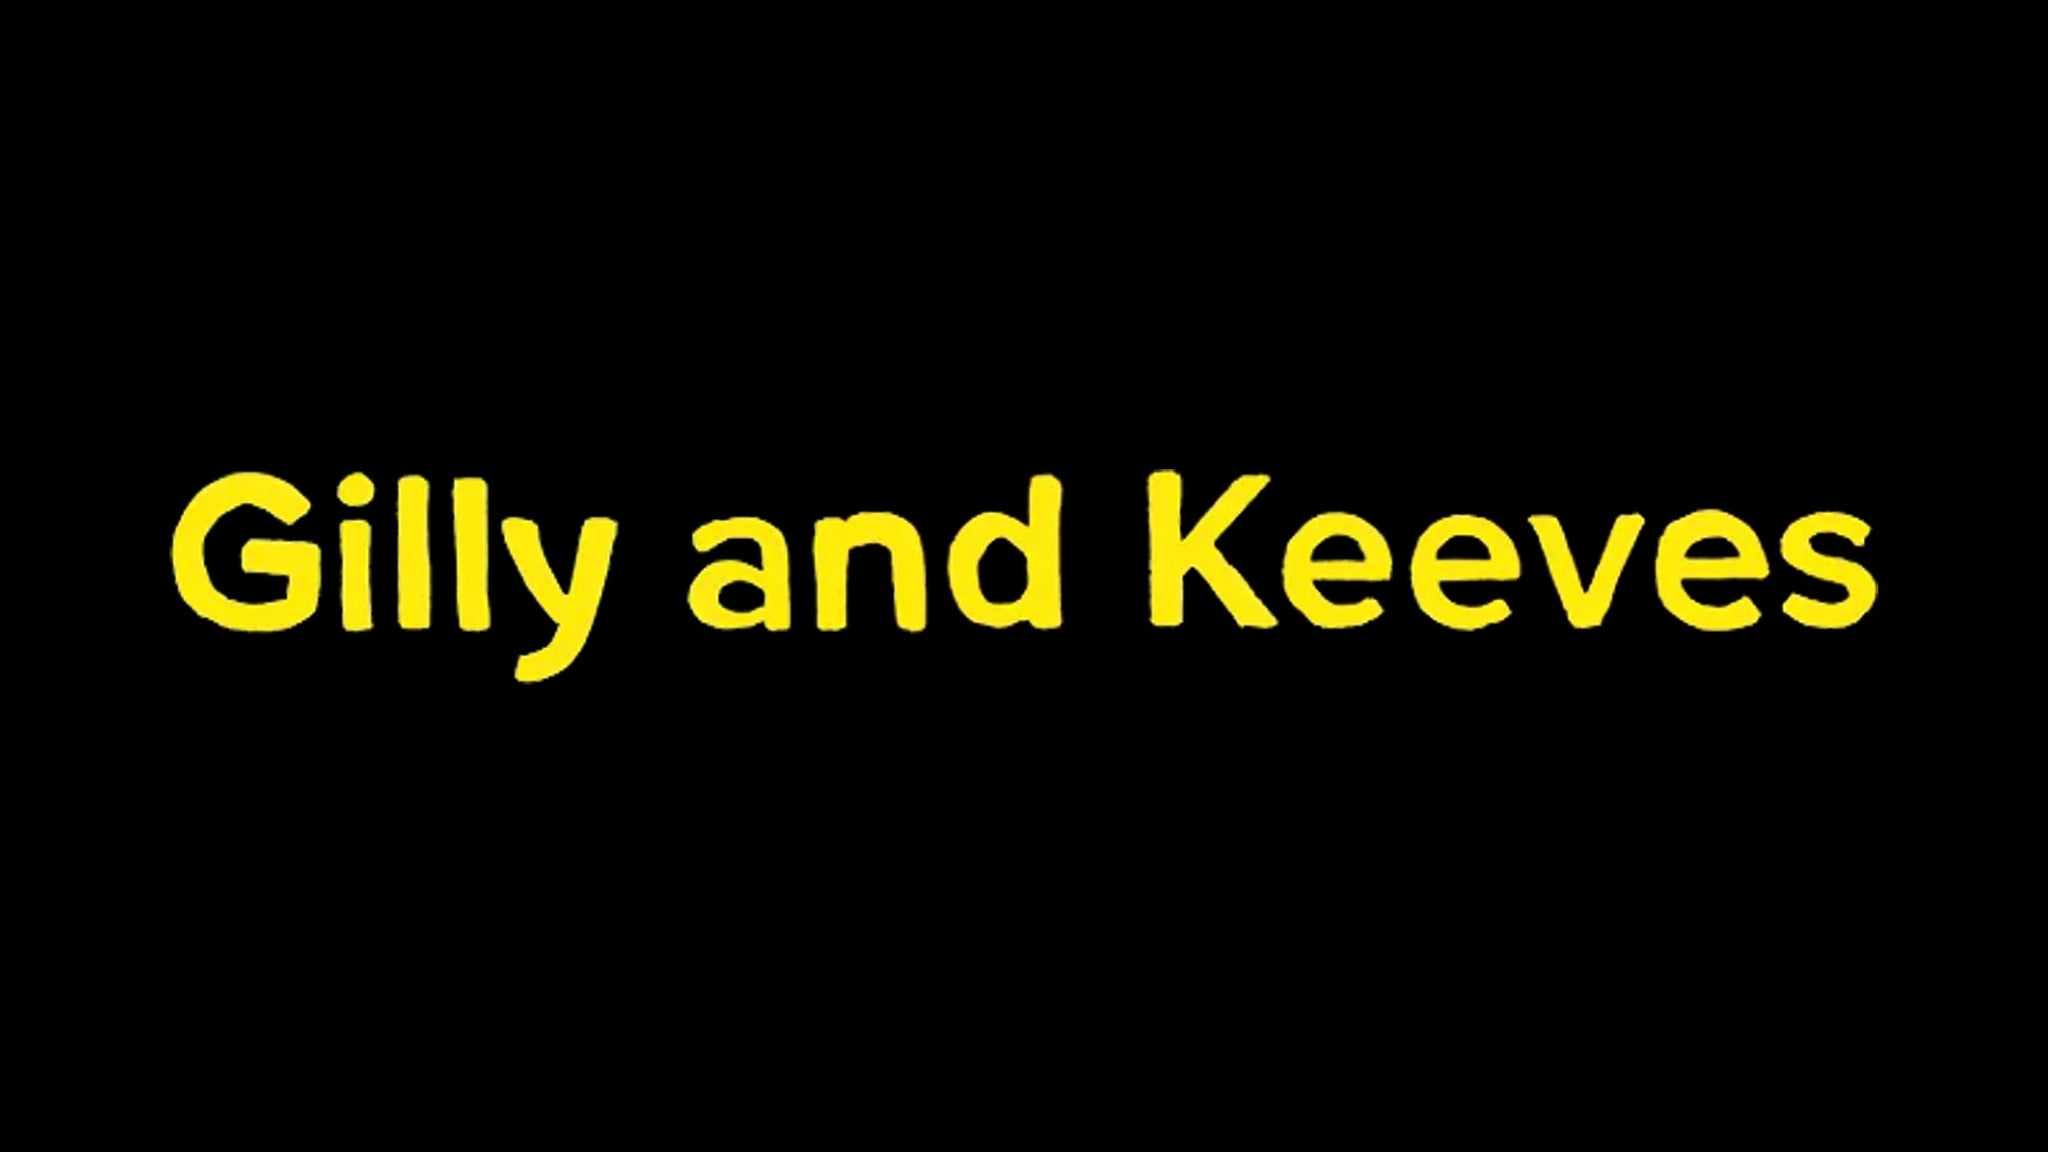 Gilly and Keeves Live presale code for performance tickets in Philadelphia, PA (Theatre of Living Arts)